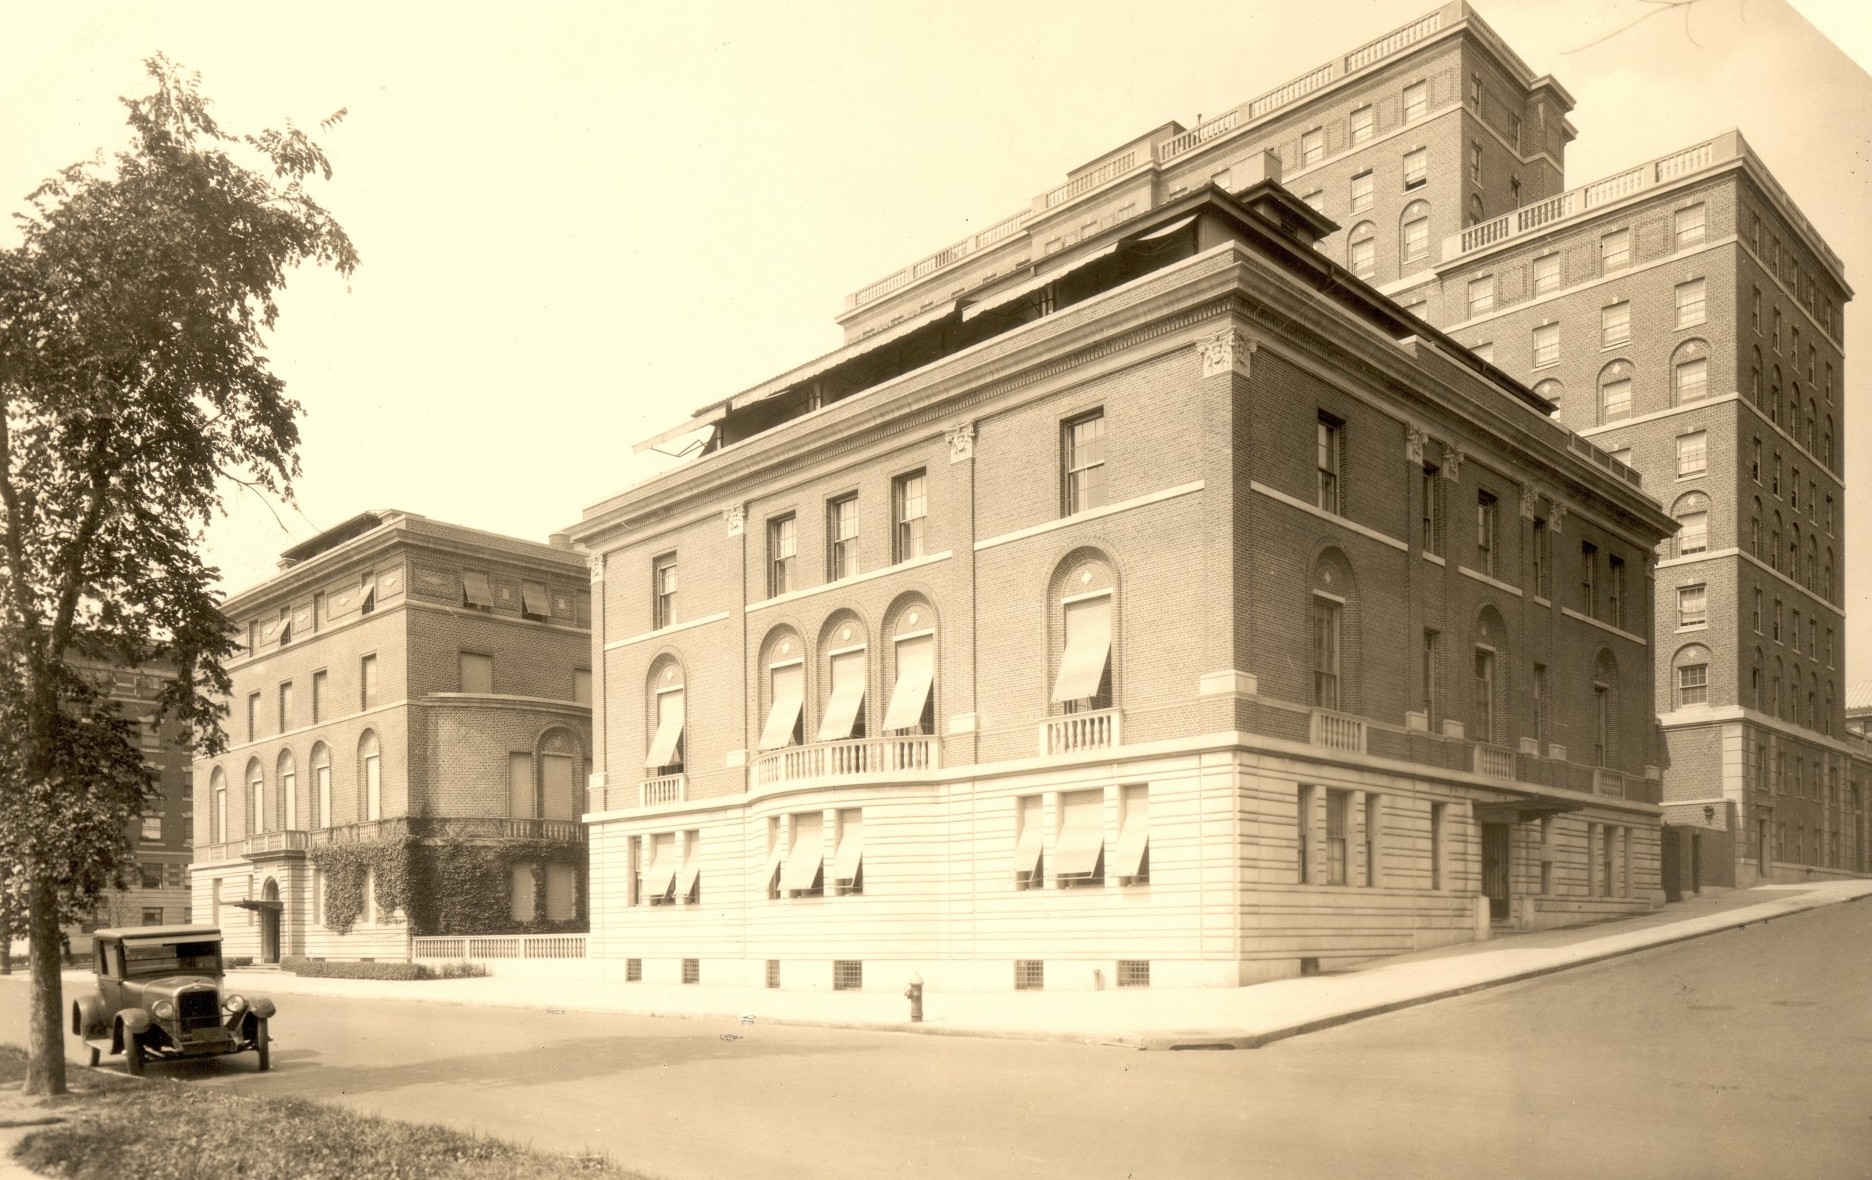 The exterior of Faculty House has it appeared when it opened in 1923